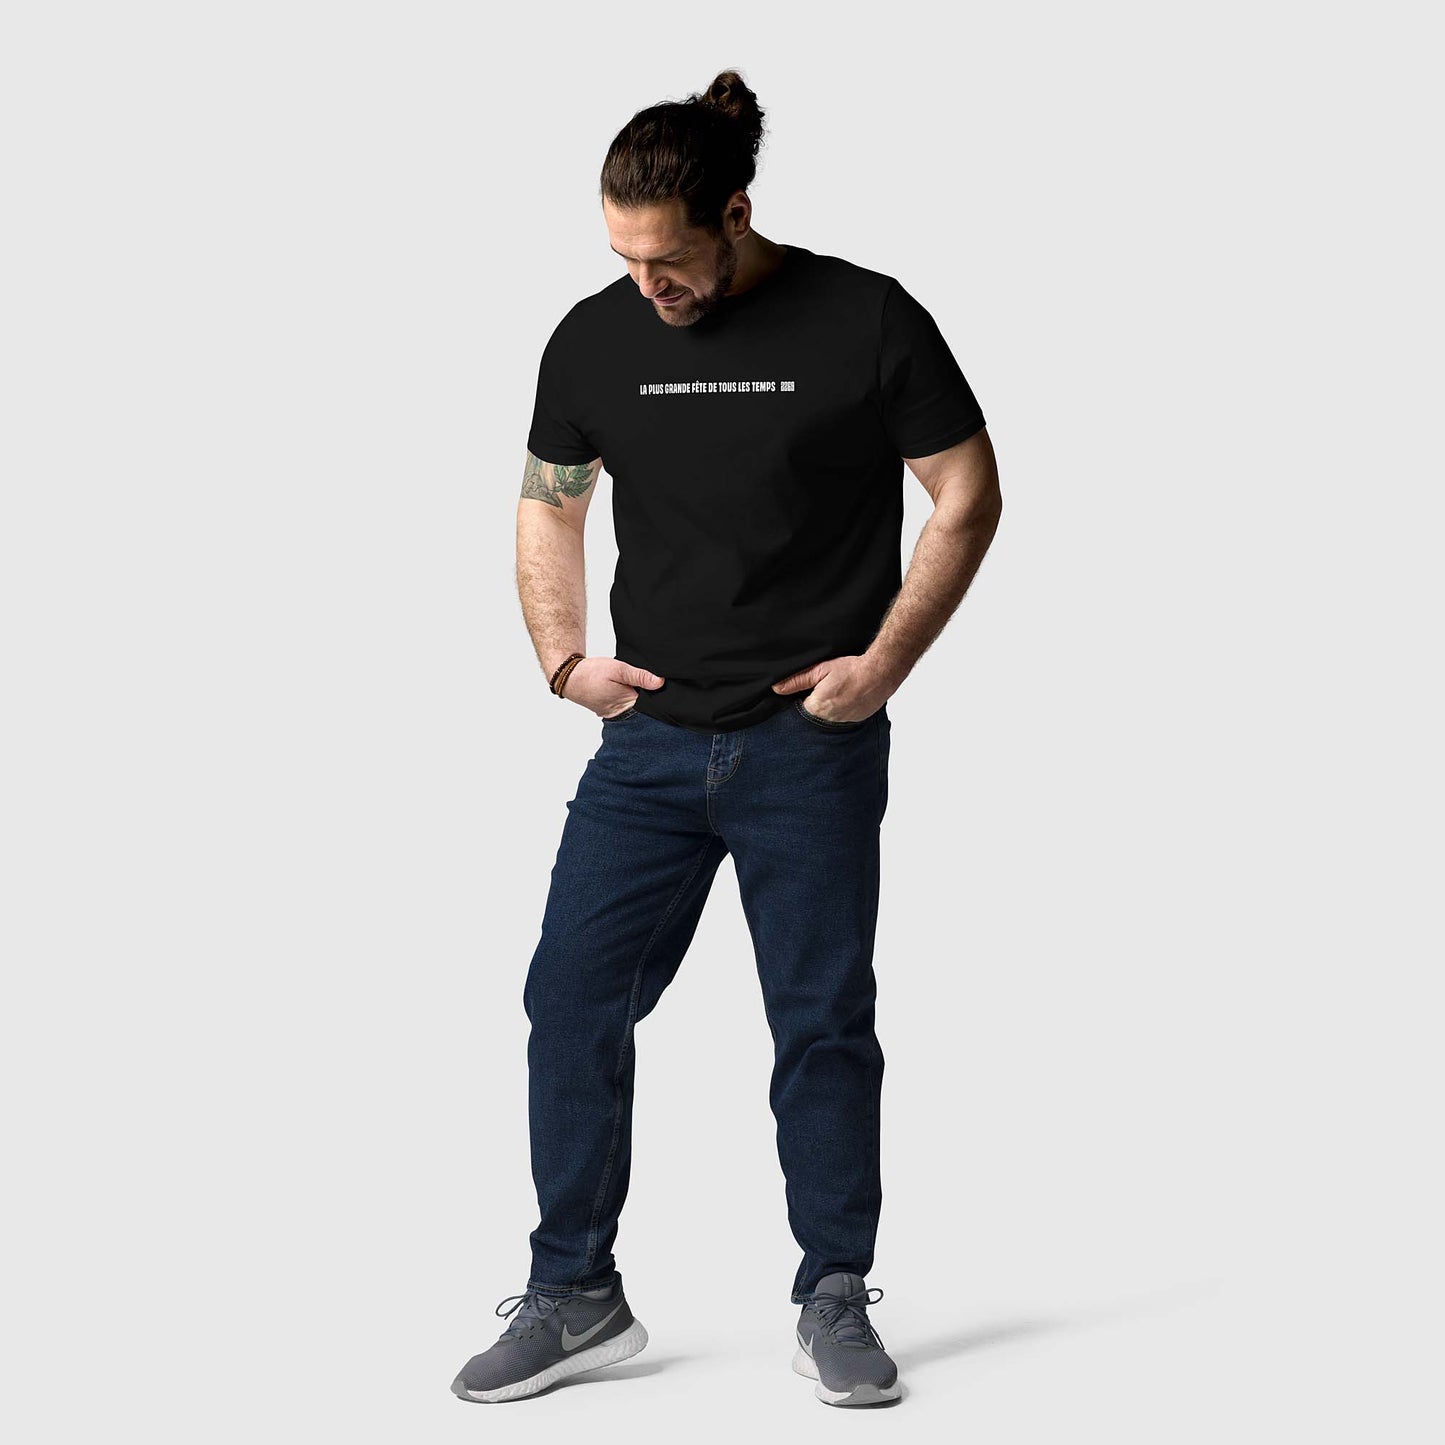 Men's black organic cotton t-shirt with French 2269 party message